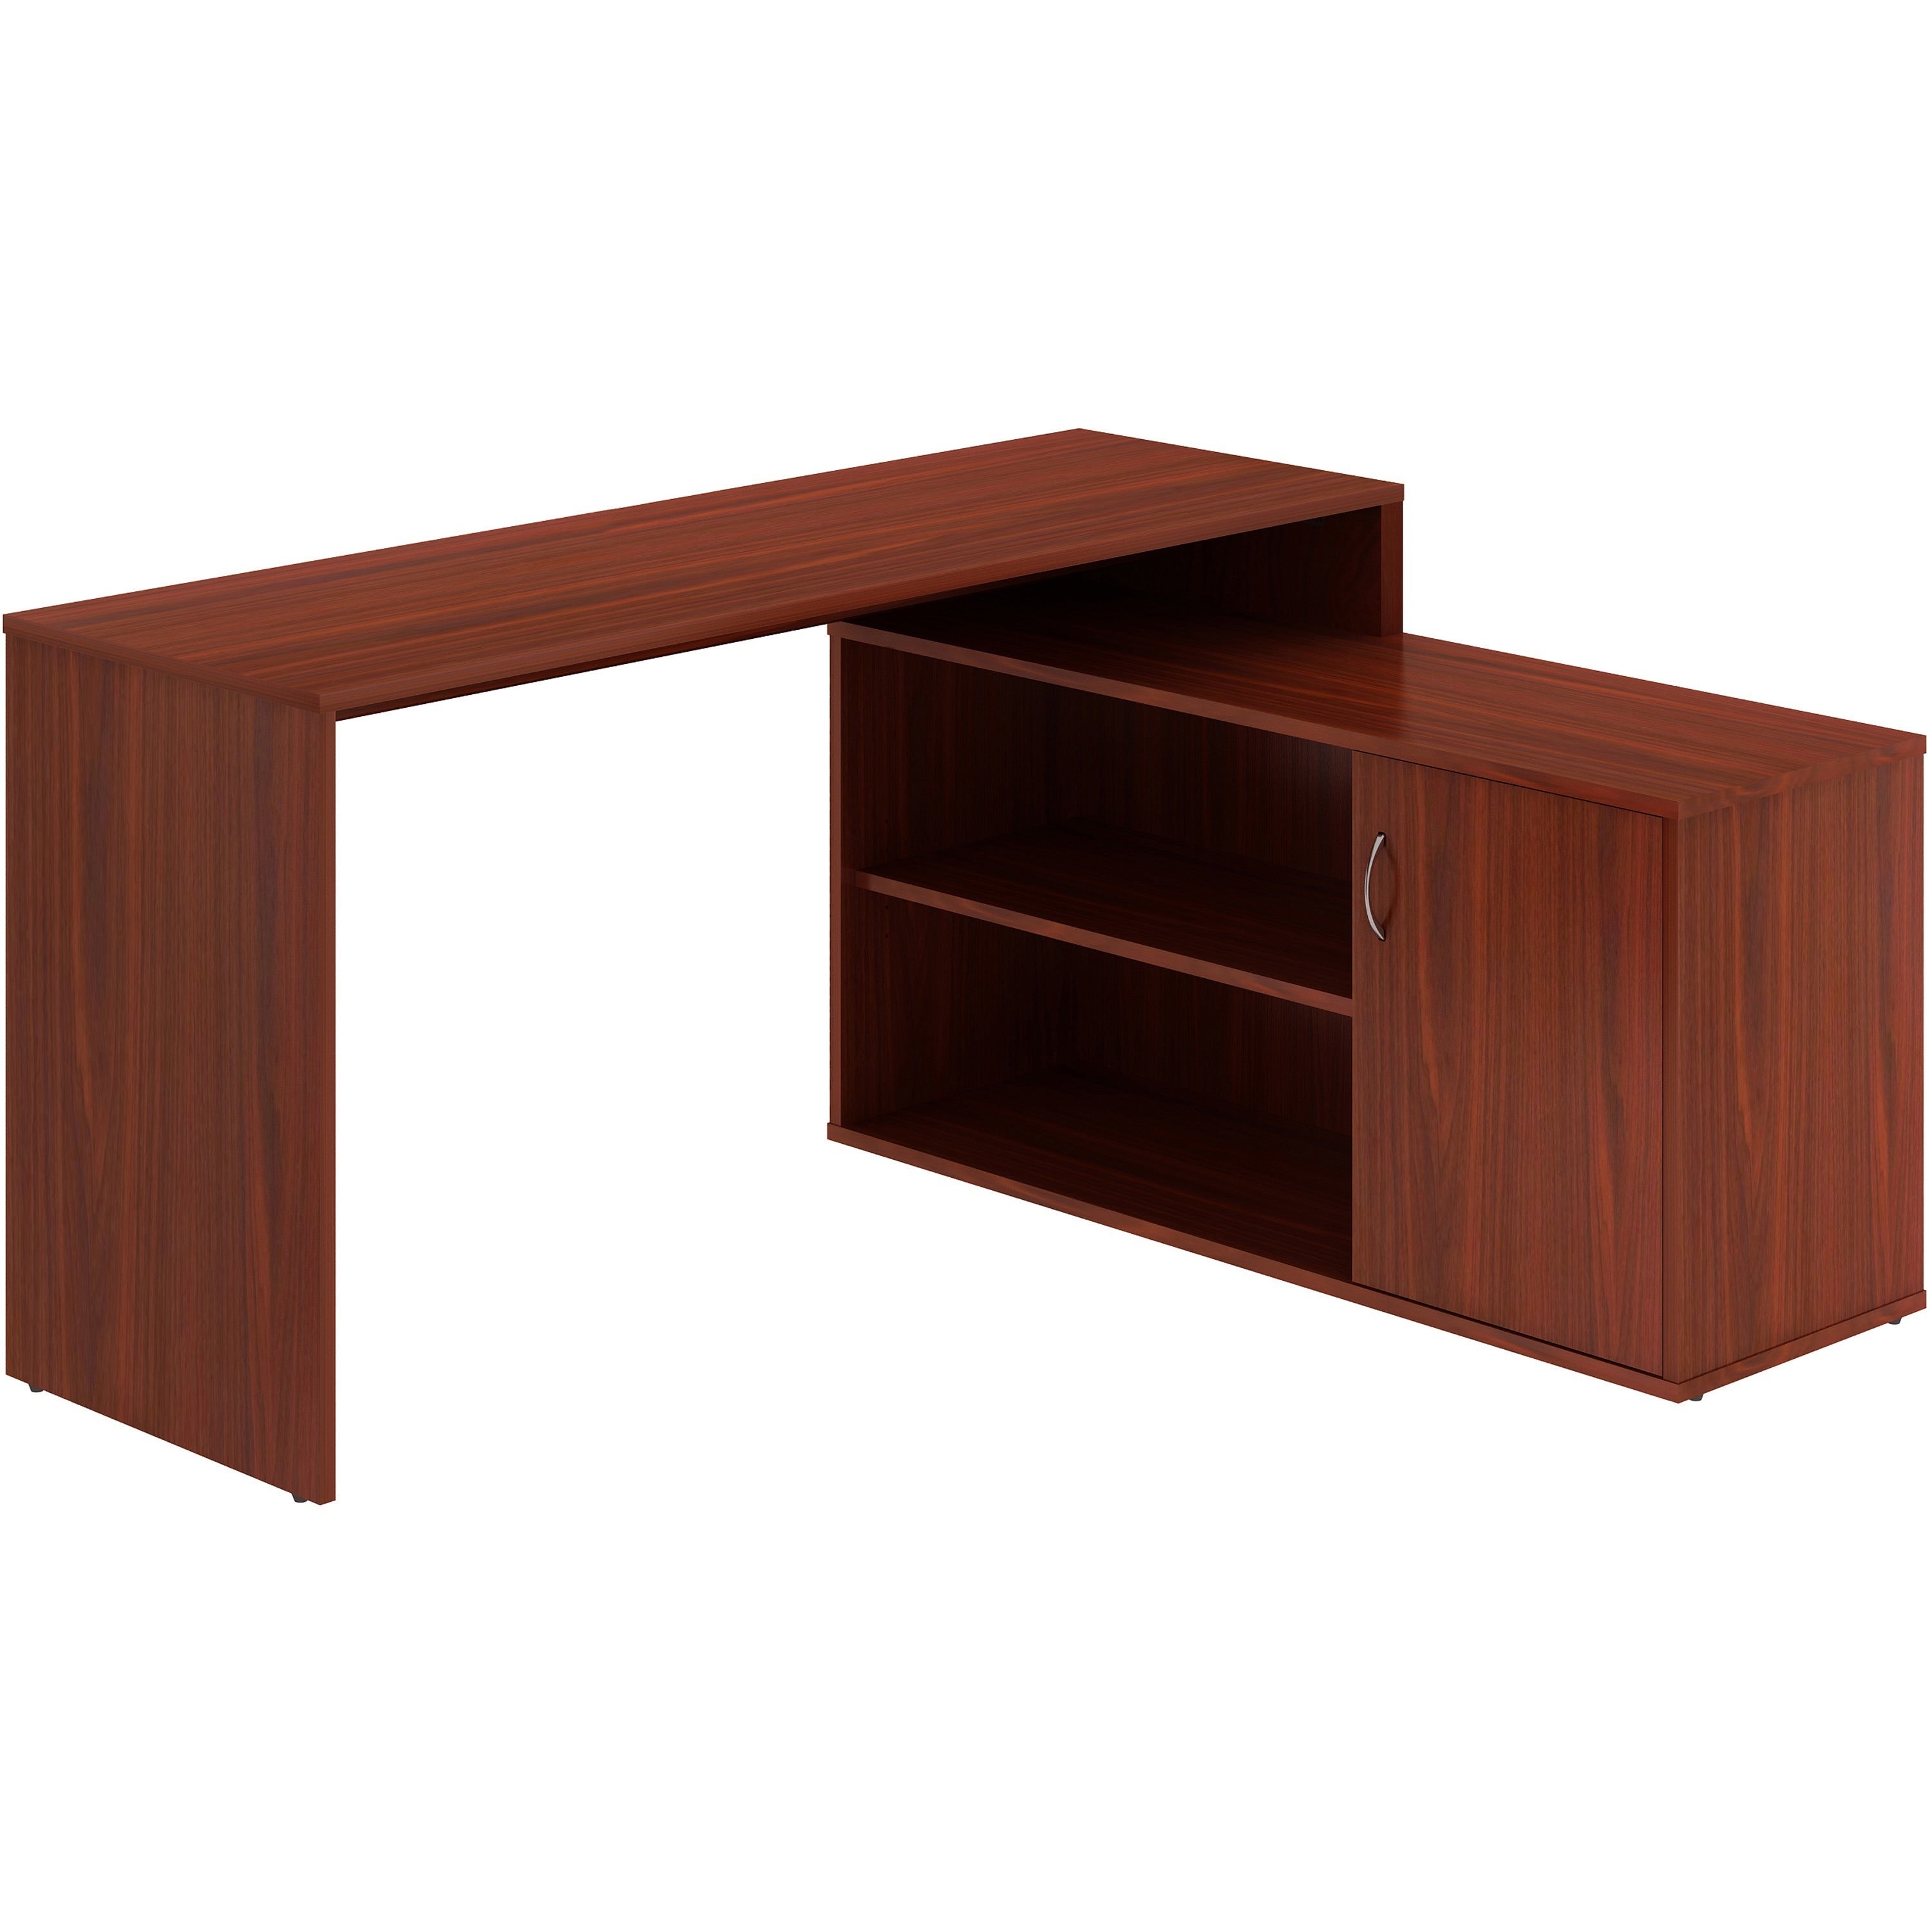 lys-l-shape-workstation-with-cabinet-for-table-toplaminated-l-shaped-top-200-lb-capacity-2950-height-x-60-width-x-4725-depth-assembly-required-mahogany-particleboard-1-each_lysdk103rrmh - 1